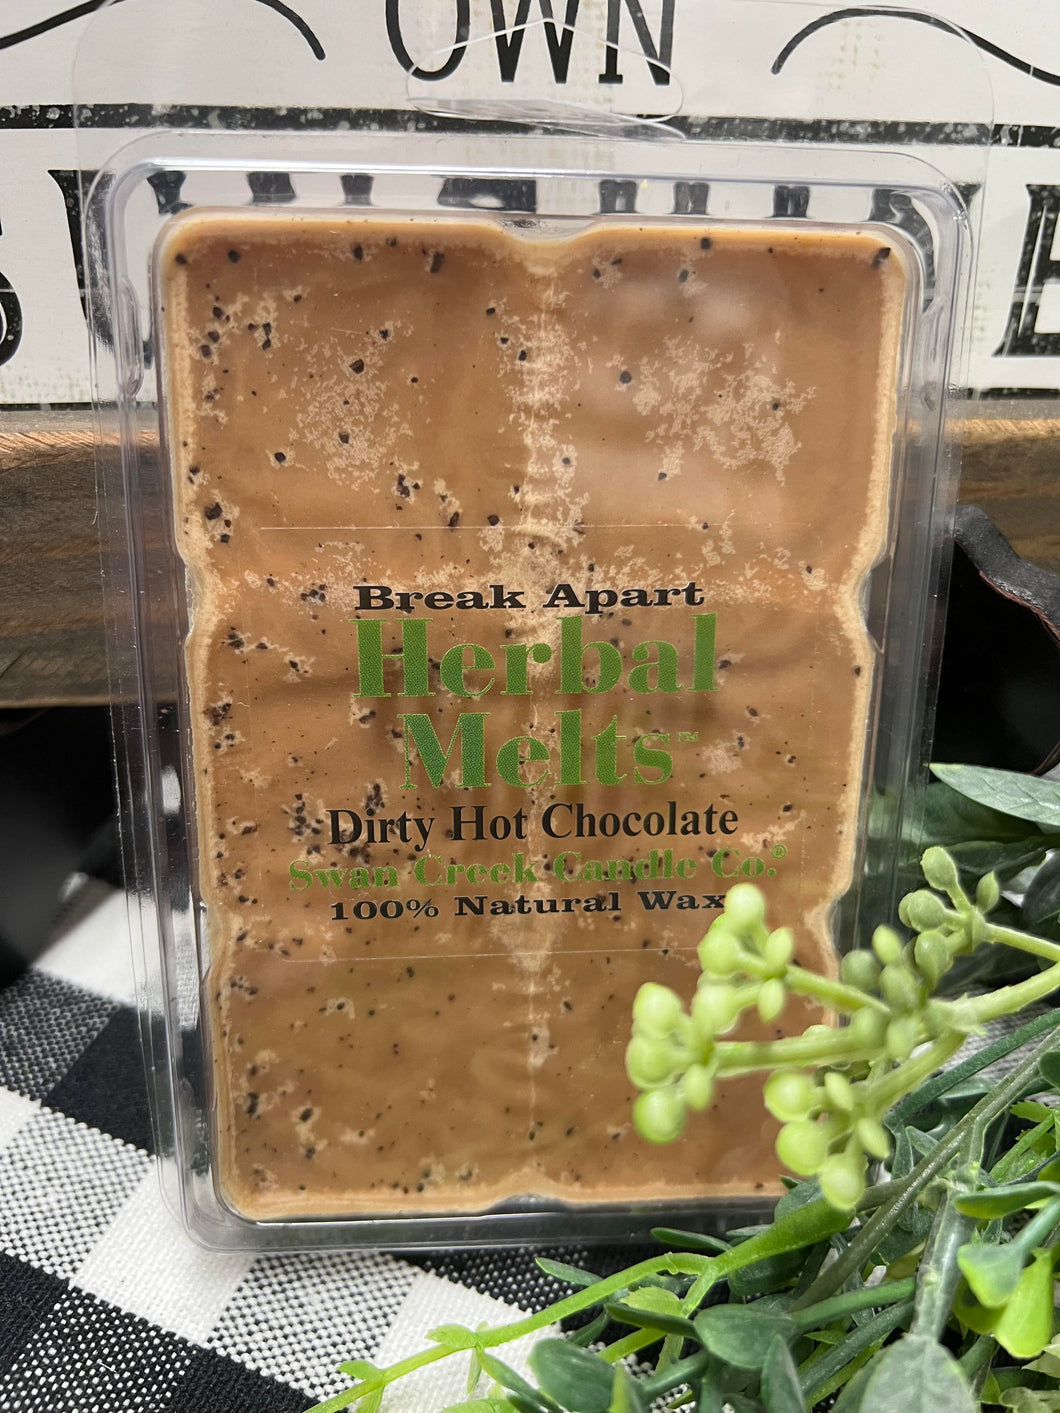 Swan Creek Candle Co. Dirty Hot Chocoloate Herbal Melts